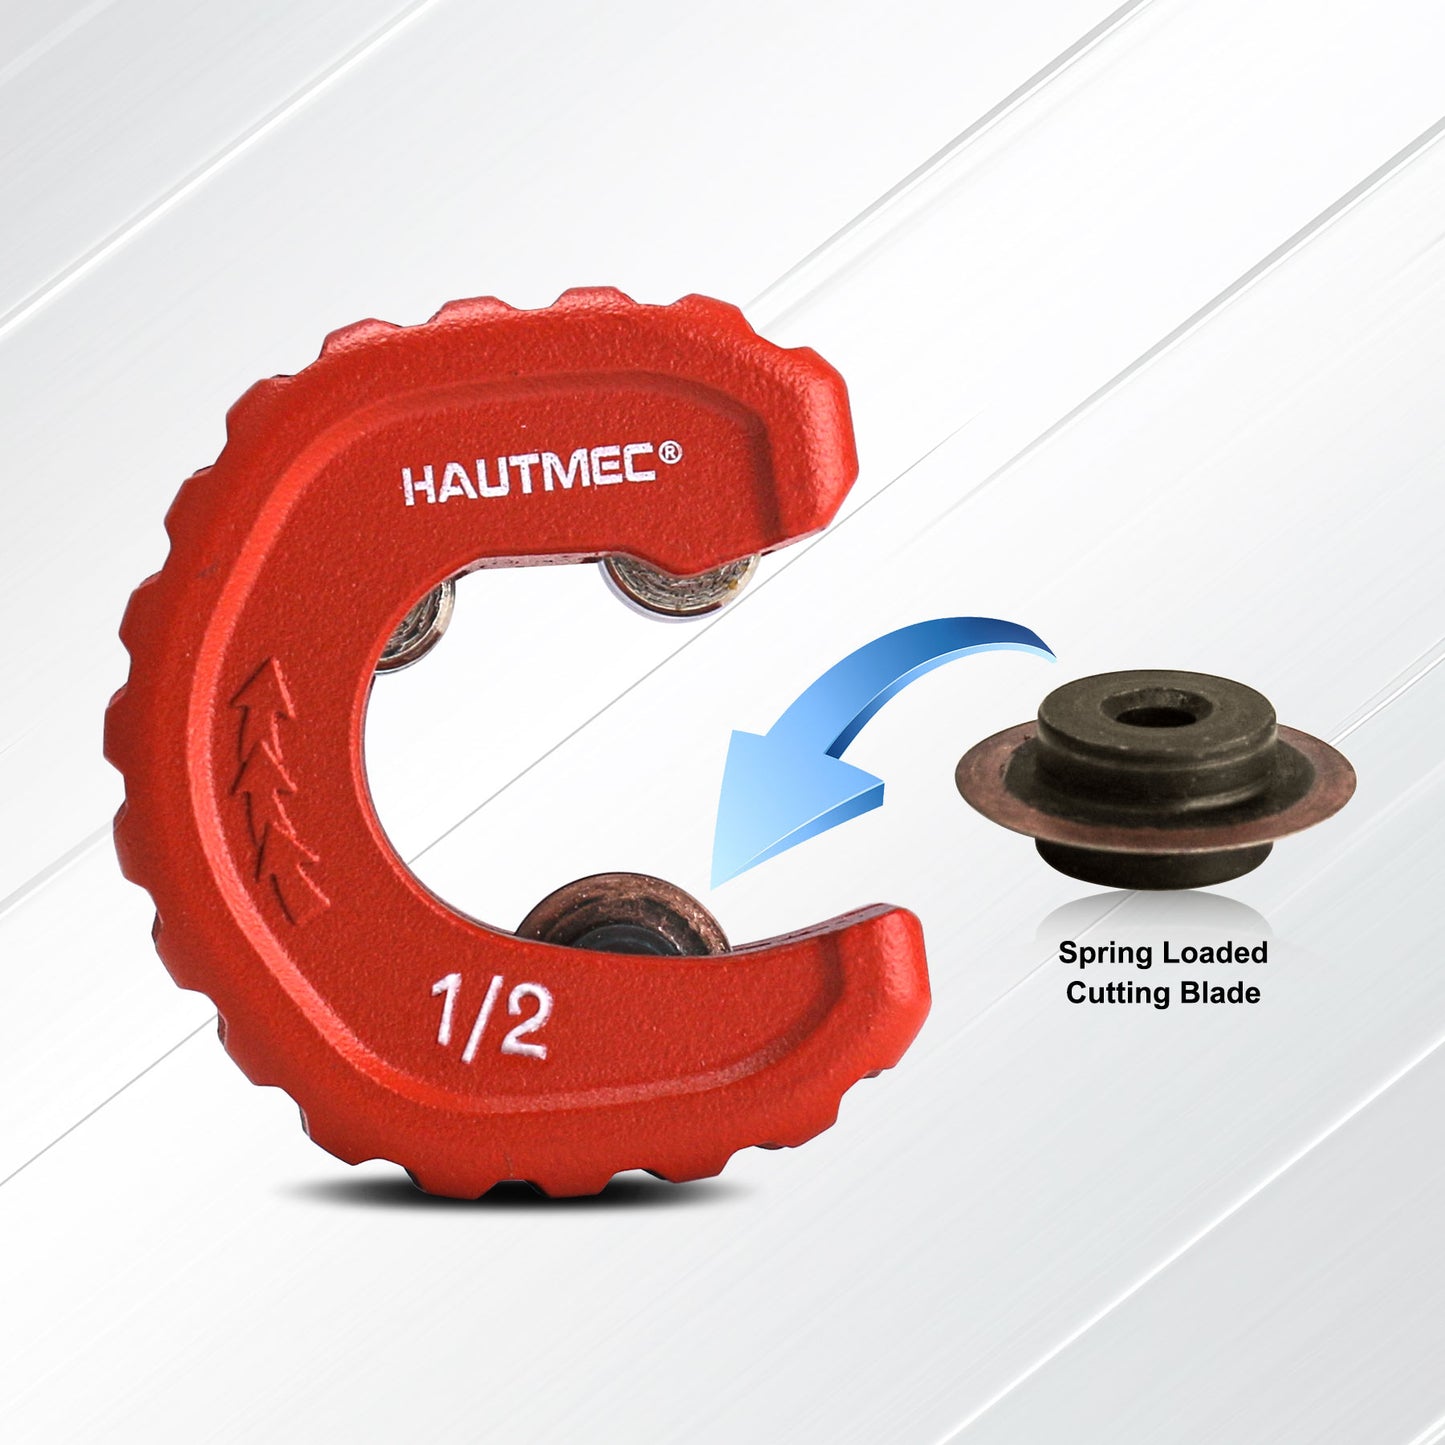 HAUTMEC Pro 1/2 Inch Automatic Copper Tube Cutter - 1/2 in. Maximum Nominal Pipe Capacity (5/8 in. Outer Diameter), for Copper, Aluminum, Brass Tube and Thin-wall Conduit, HT0215-PL